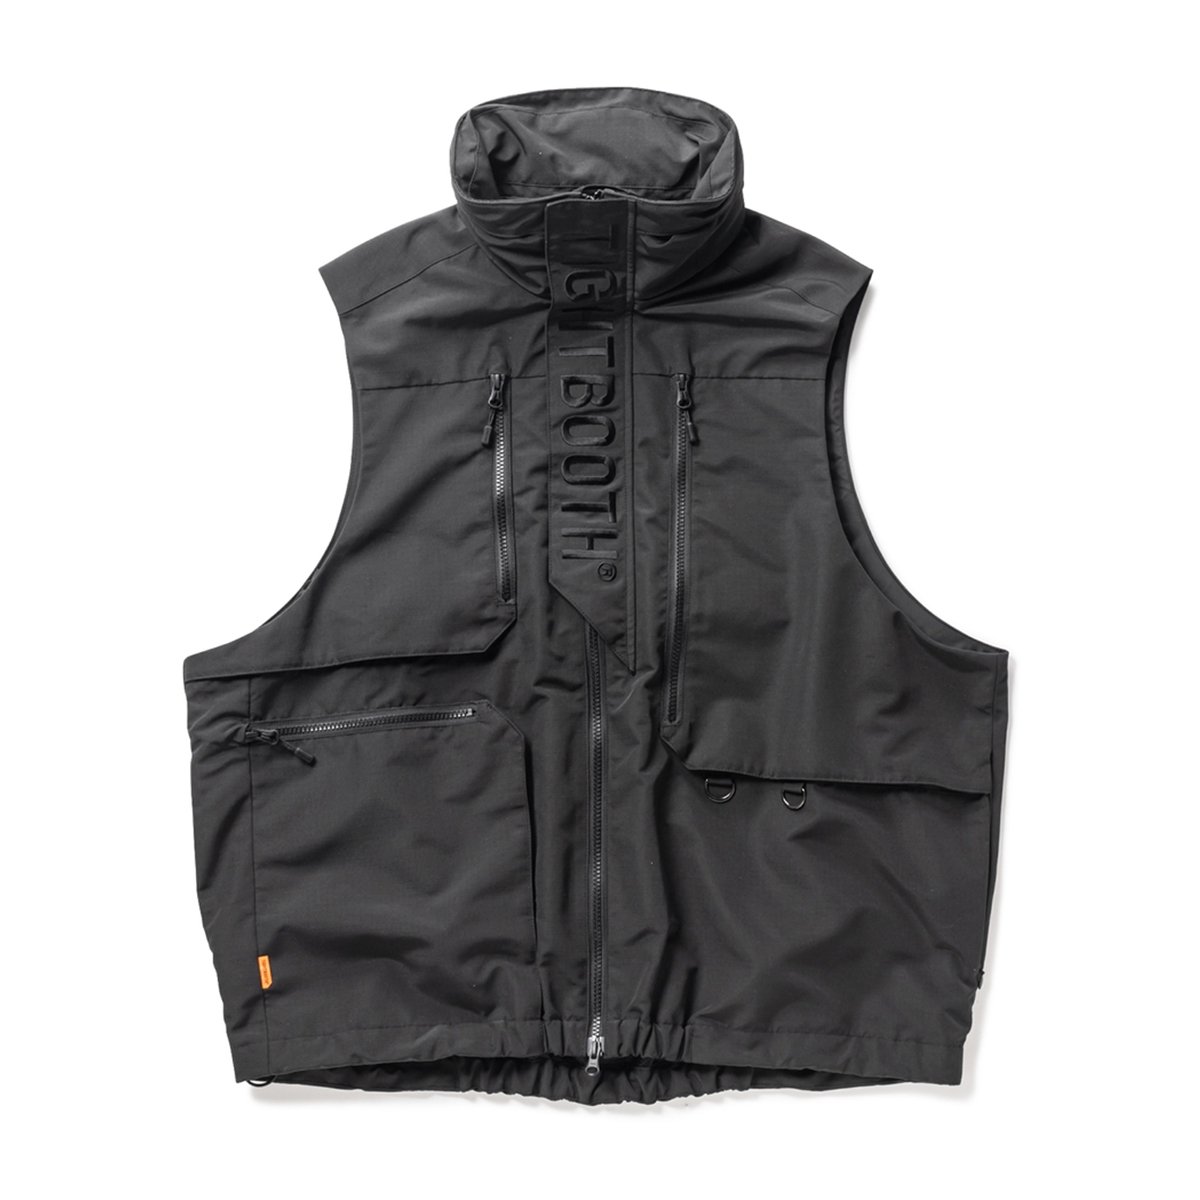 TIGHTBOOTHRipstop Tactical Vest (Black)
                          </a>
            <span class=